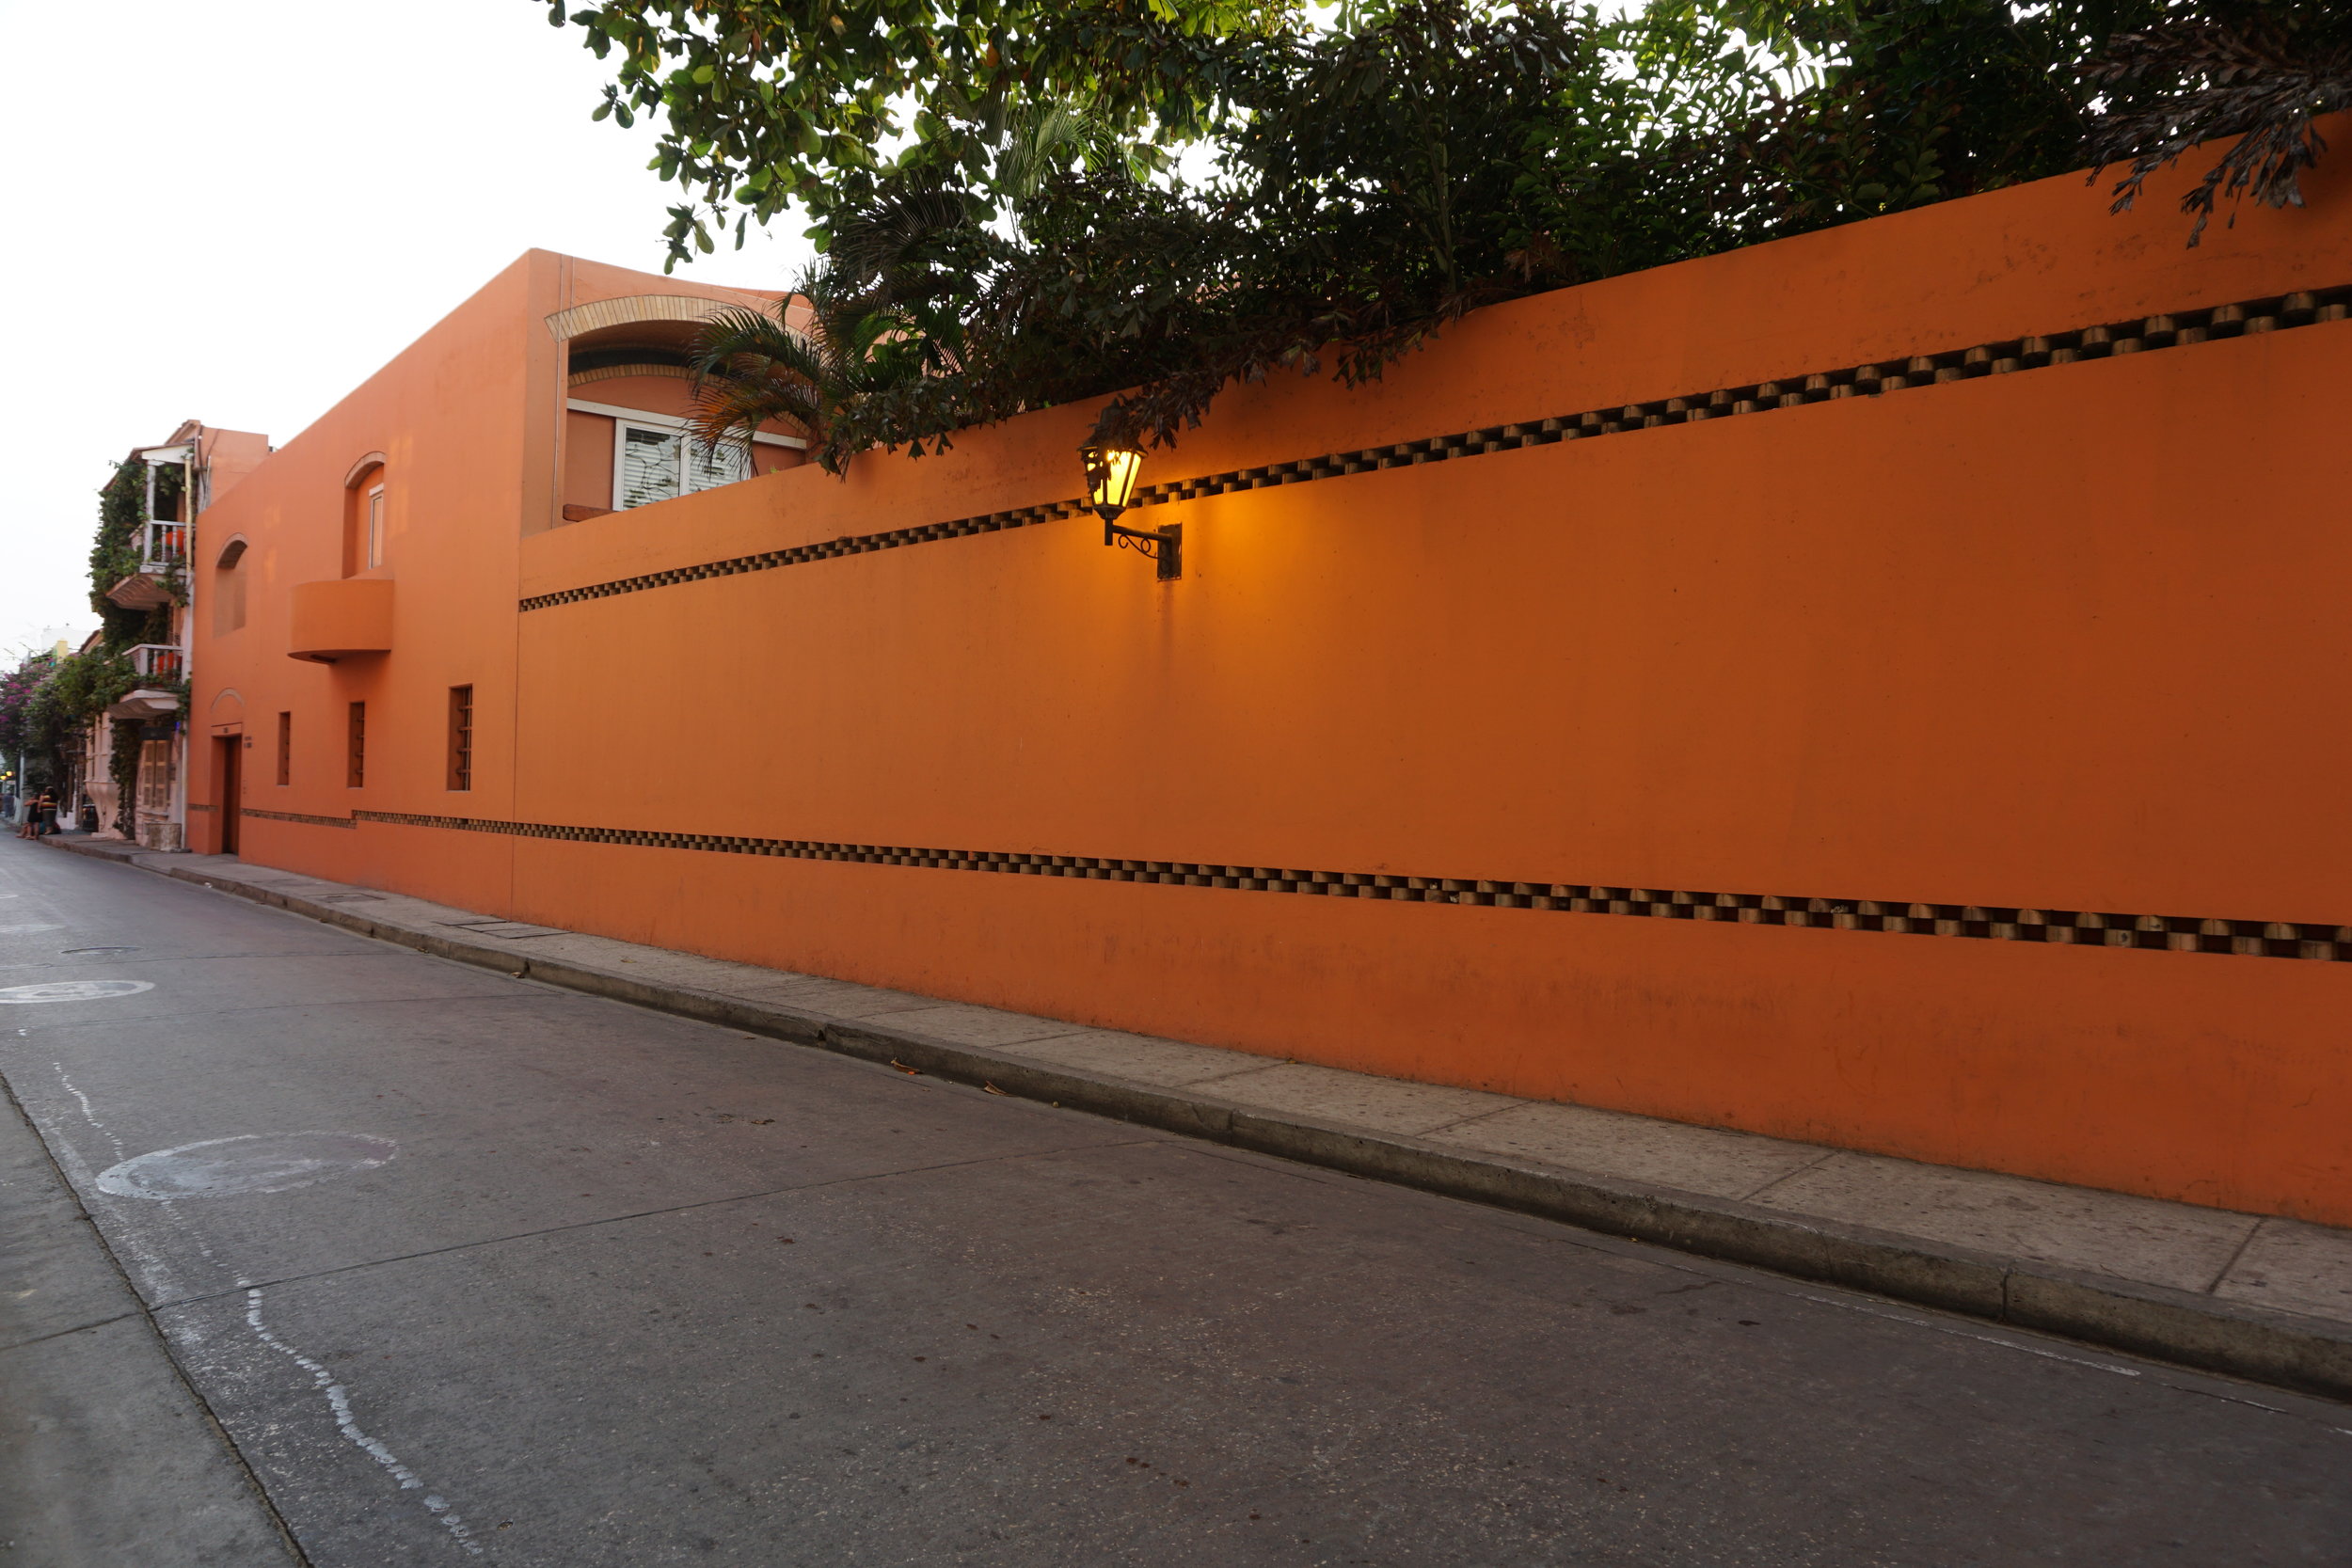 Orange outside wall of a large house in Cartagena Colombia